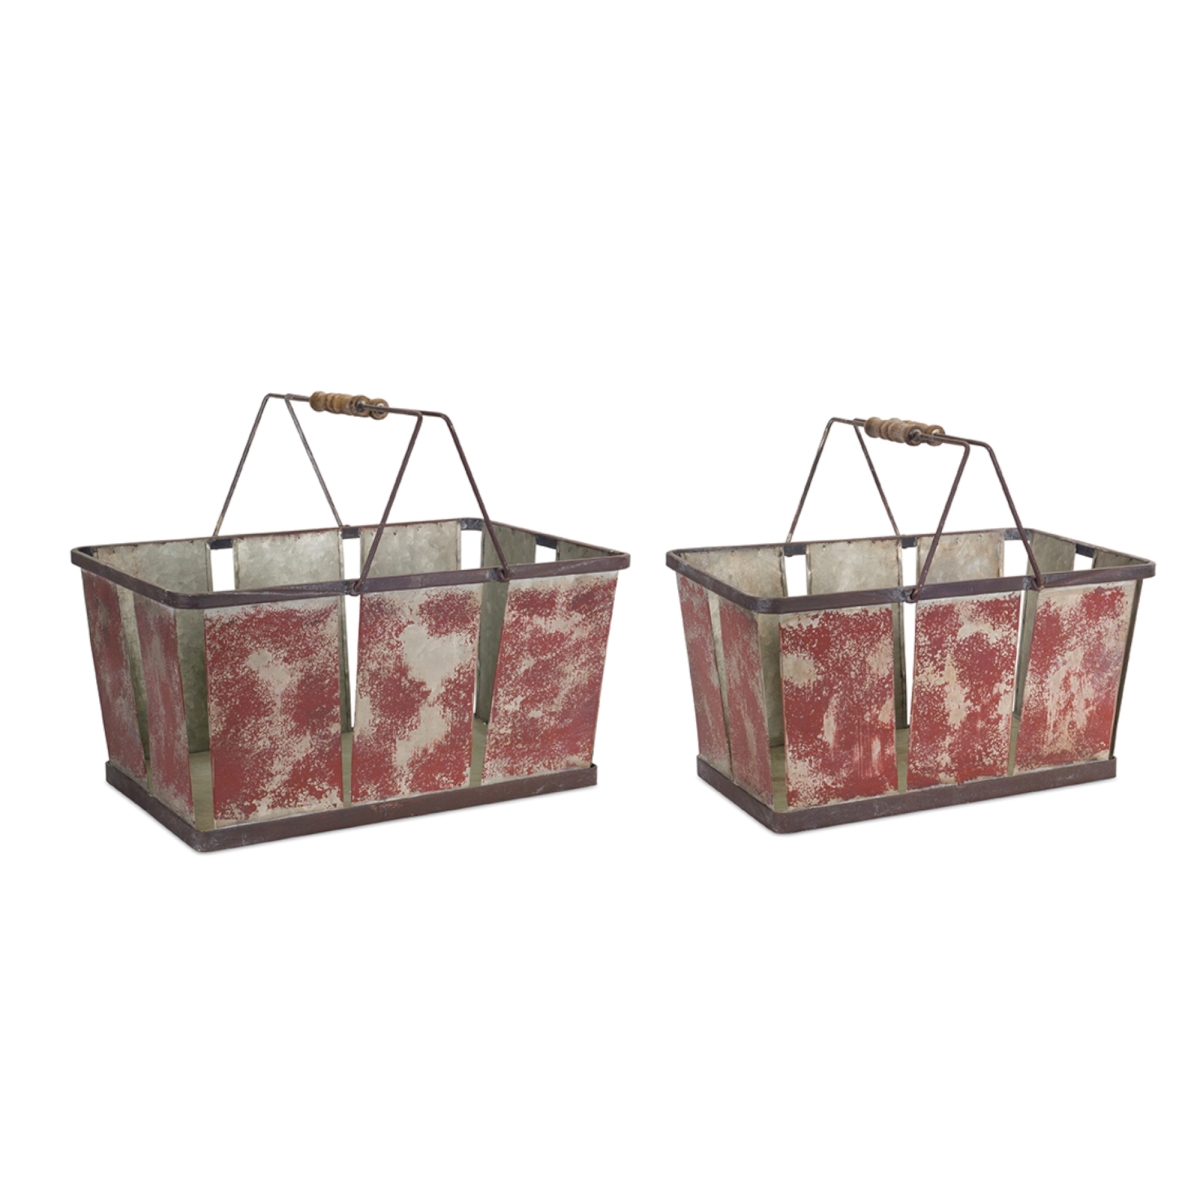 72470ds 8.5 X 9 In. Metal Pail, Red & Brown - Set Of 2